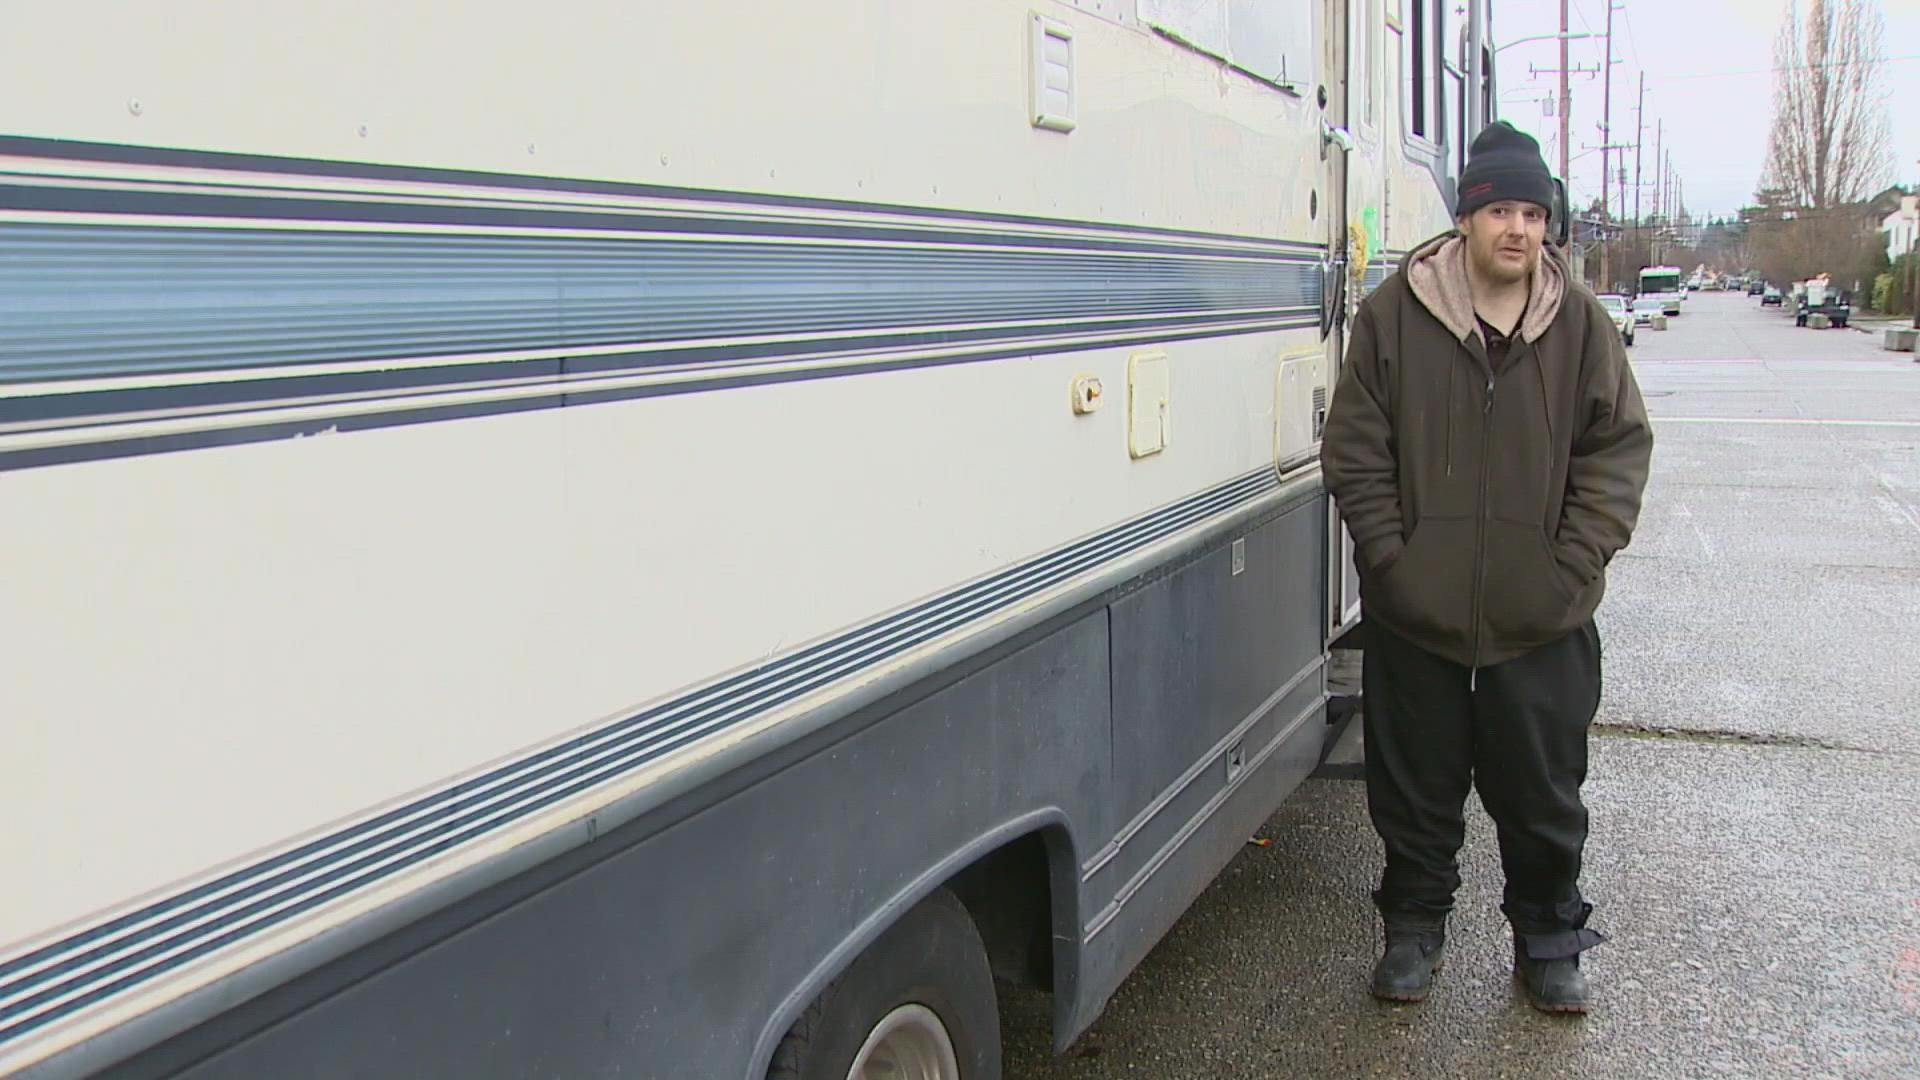 Timothy Barto wasn't always unhoused. Rising rent, however, forced him to resort to living in cars and RVs. He's been on the streets since 2017.